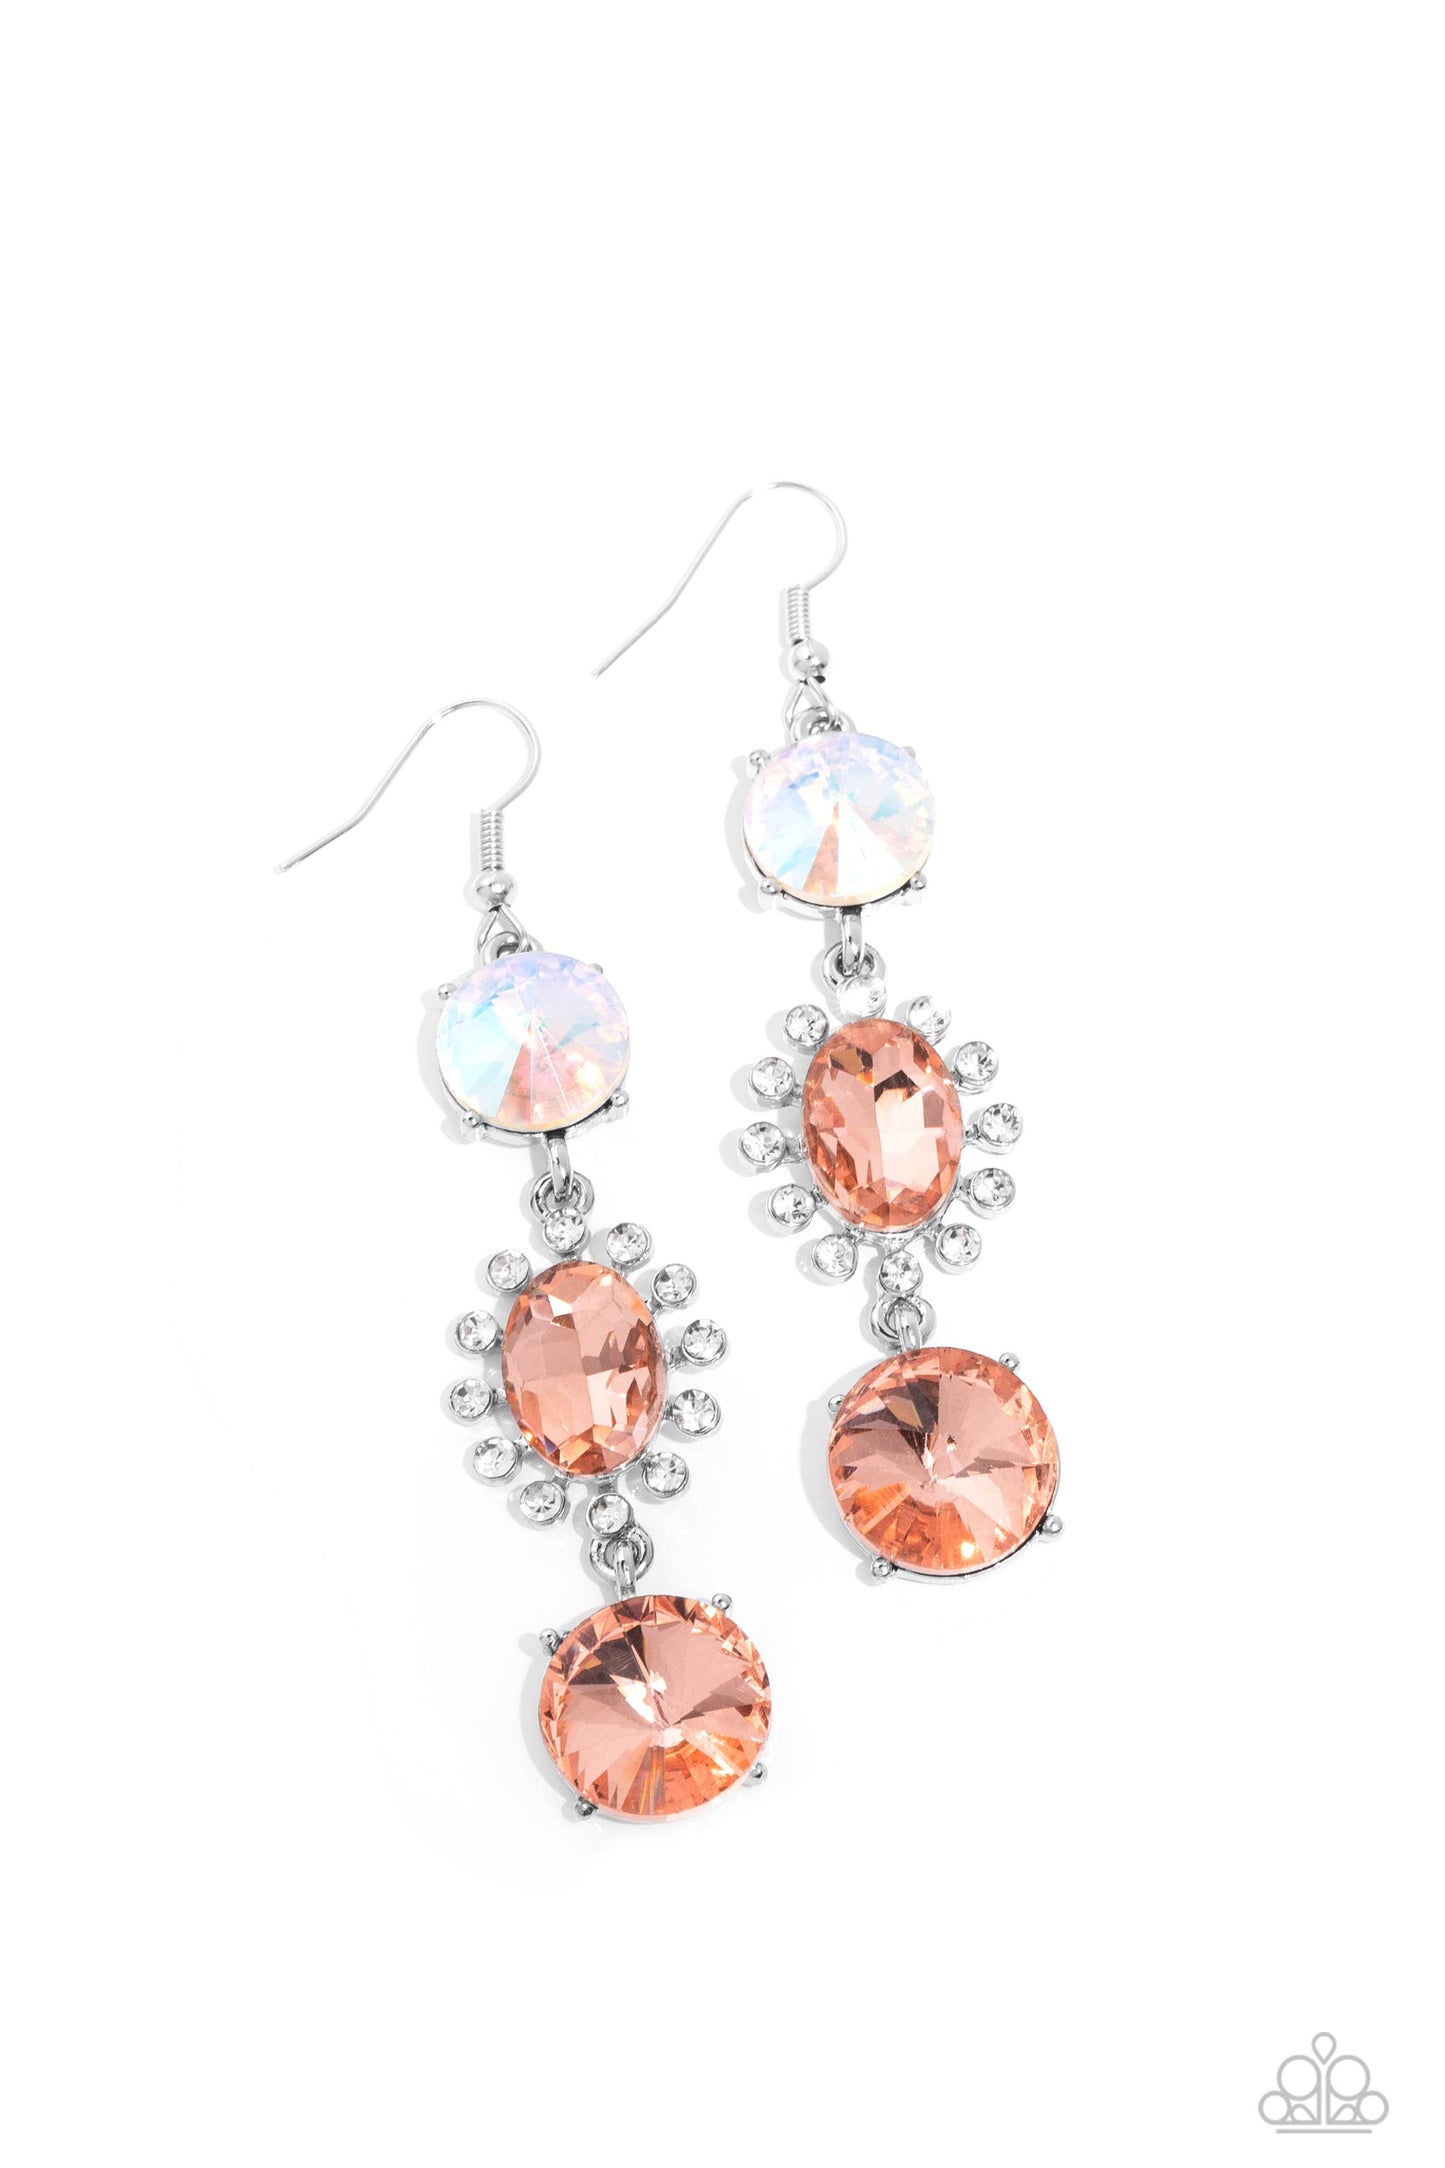 Paparazzi Magical Melodrama - Multi Peach Earrings - A Finishing Touch Jewelry